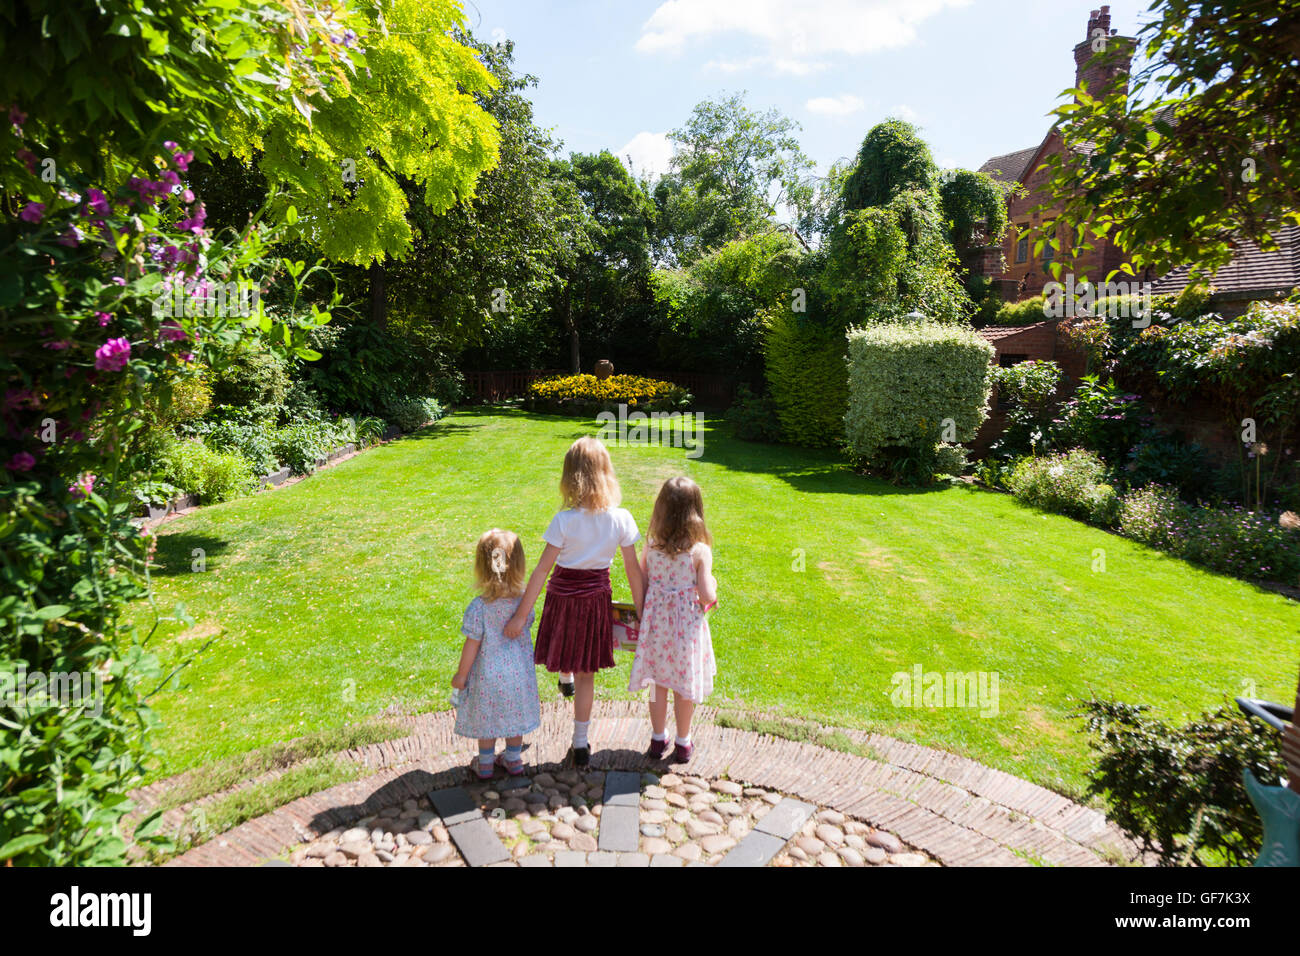 Greyfriars' House and Gardens with 3 children / kids / kid about to run & play on the garden lawn grass. Friar St, Worcester. UK Stock Photo